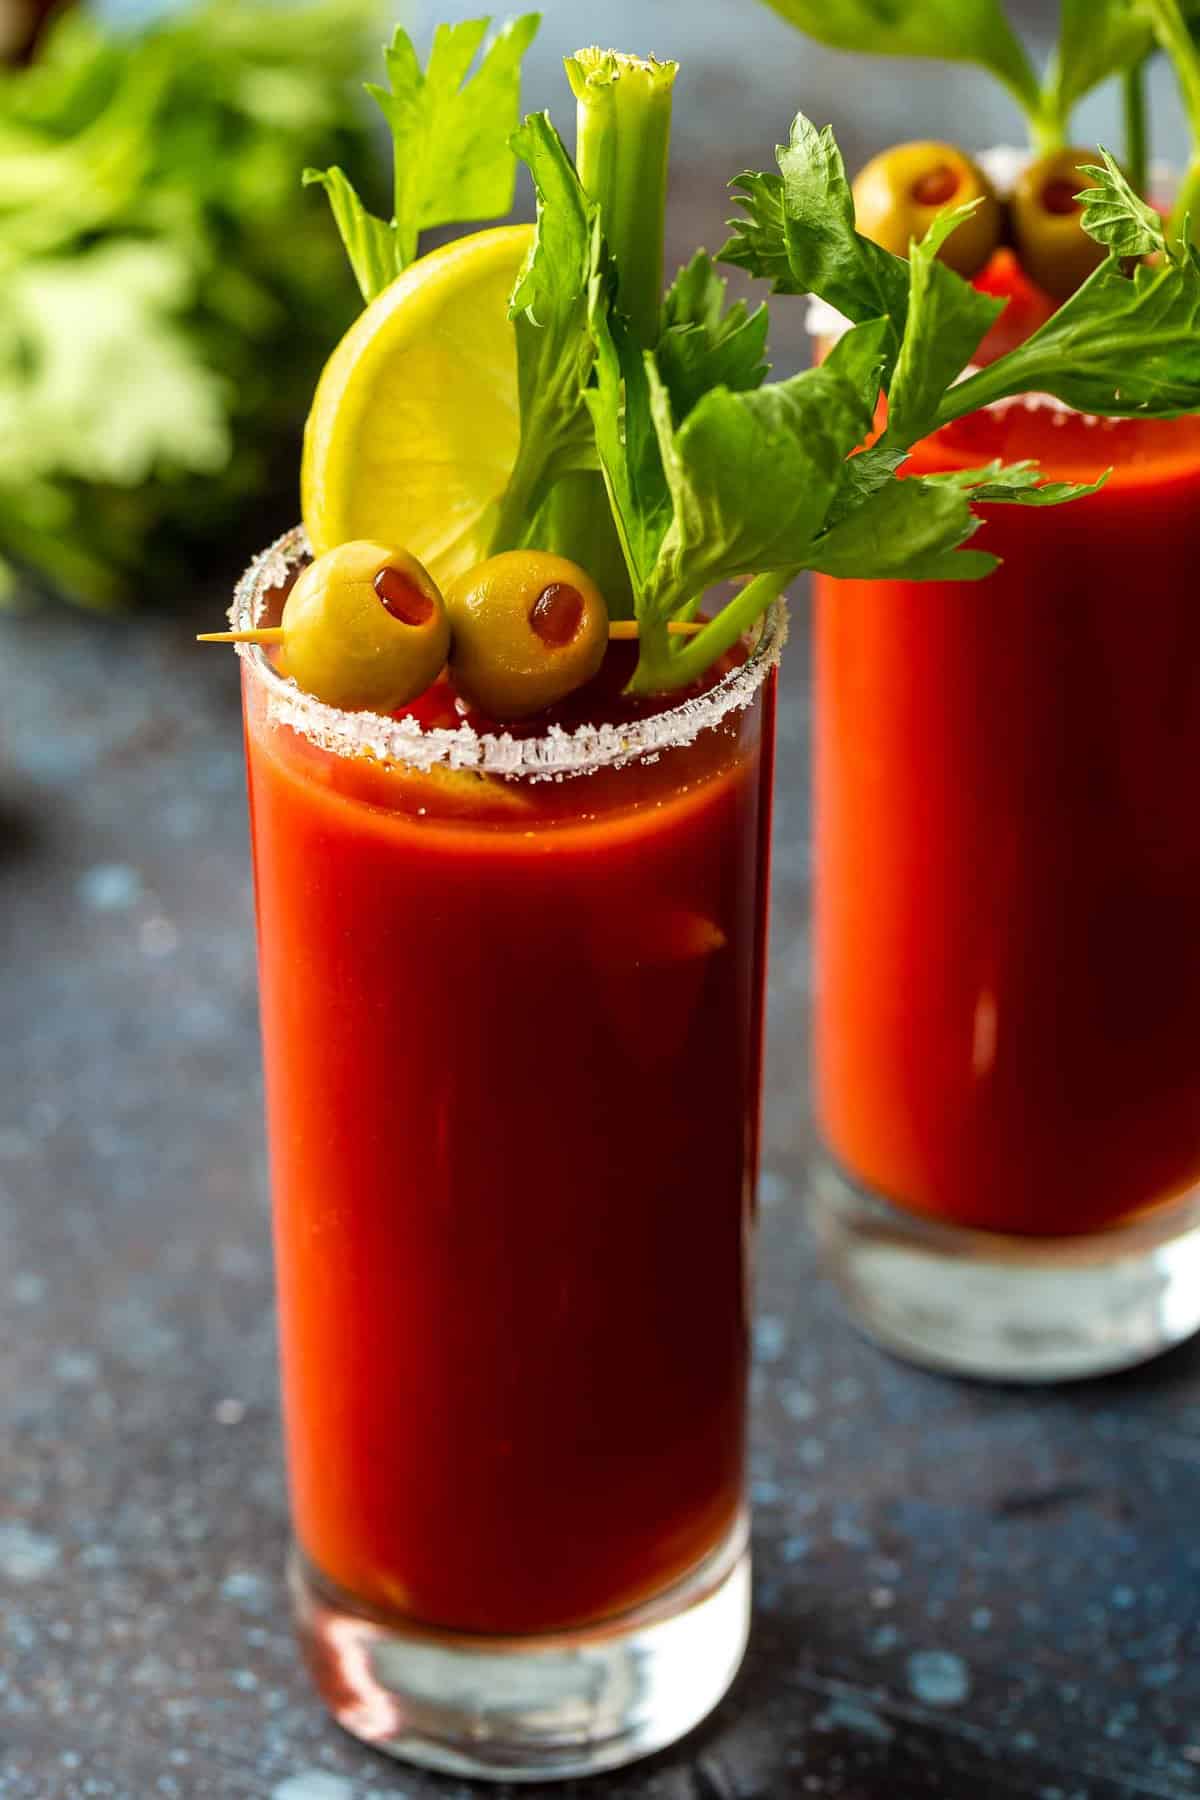 Best Bloody Mary Recipe How To Make A Bloody Mary Video,How To Make Bread